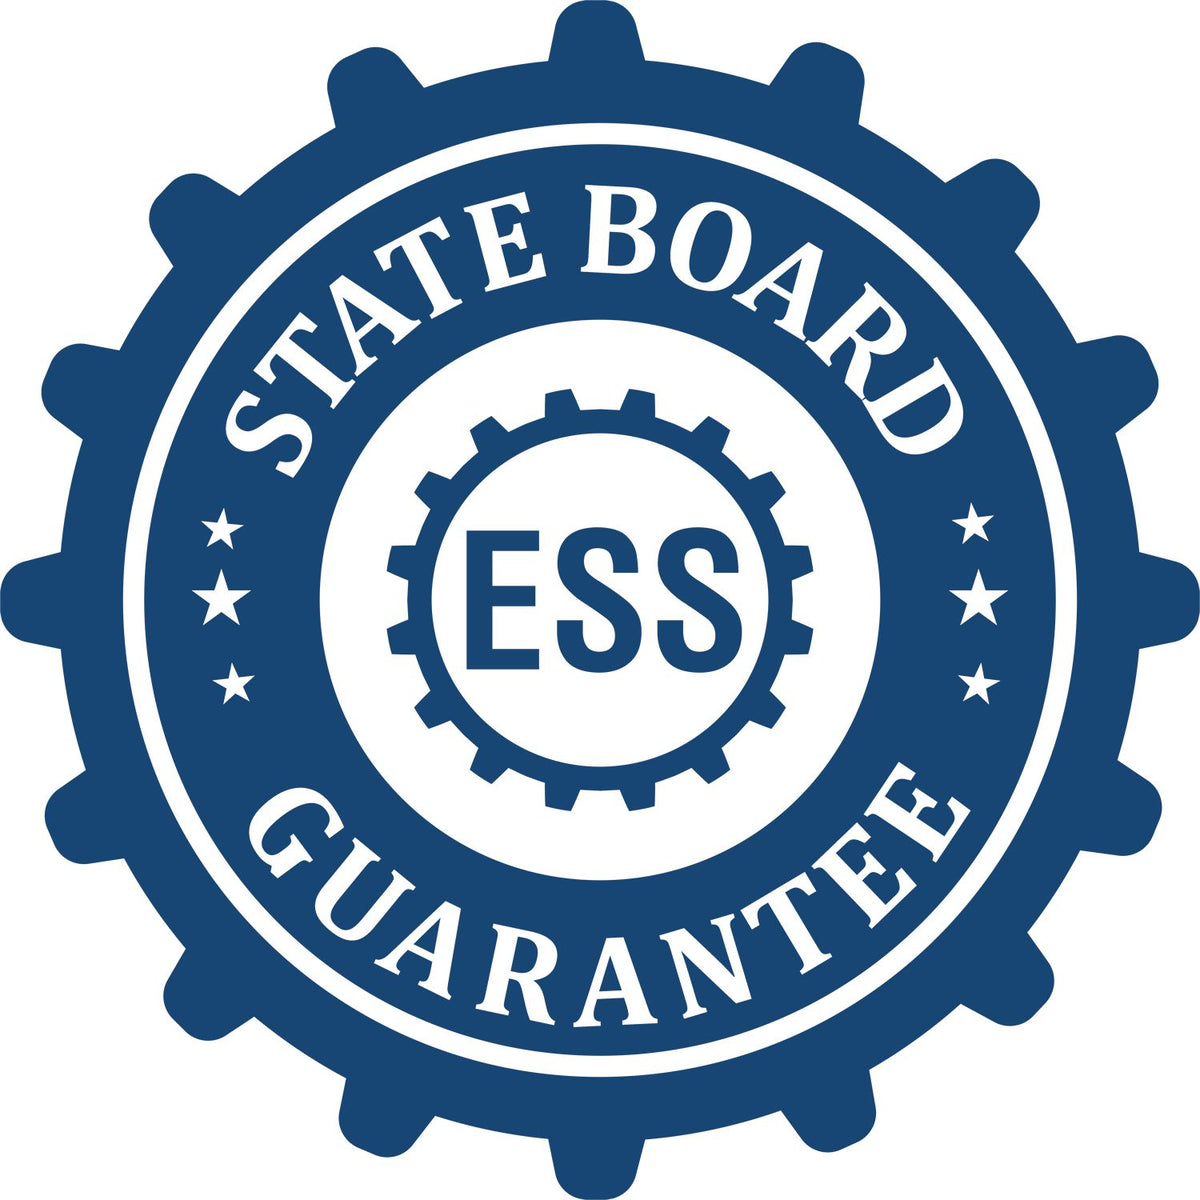 An emblem in a gear shape illustrating a state board guarantee for the Hybrid Tennessee Landscape Architect Seal